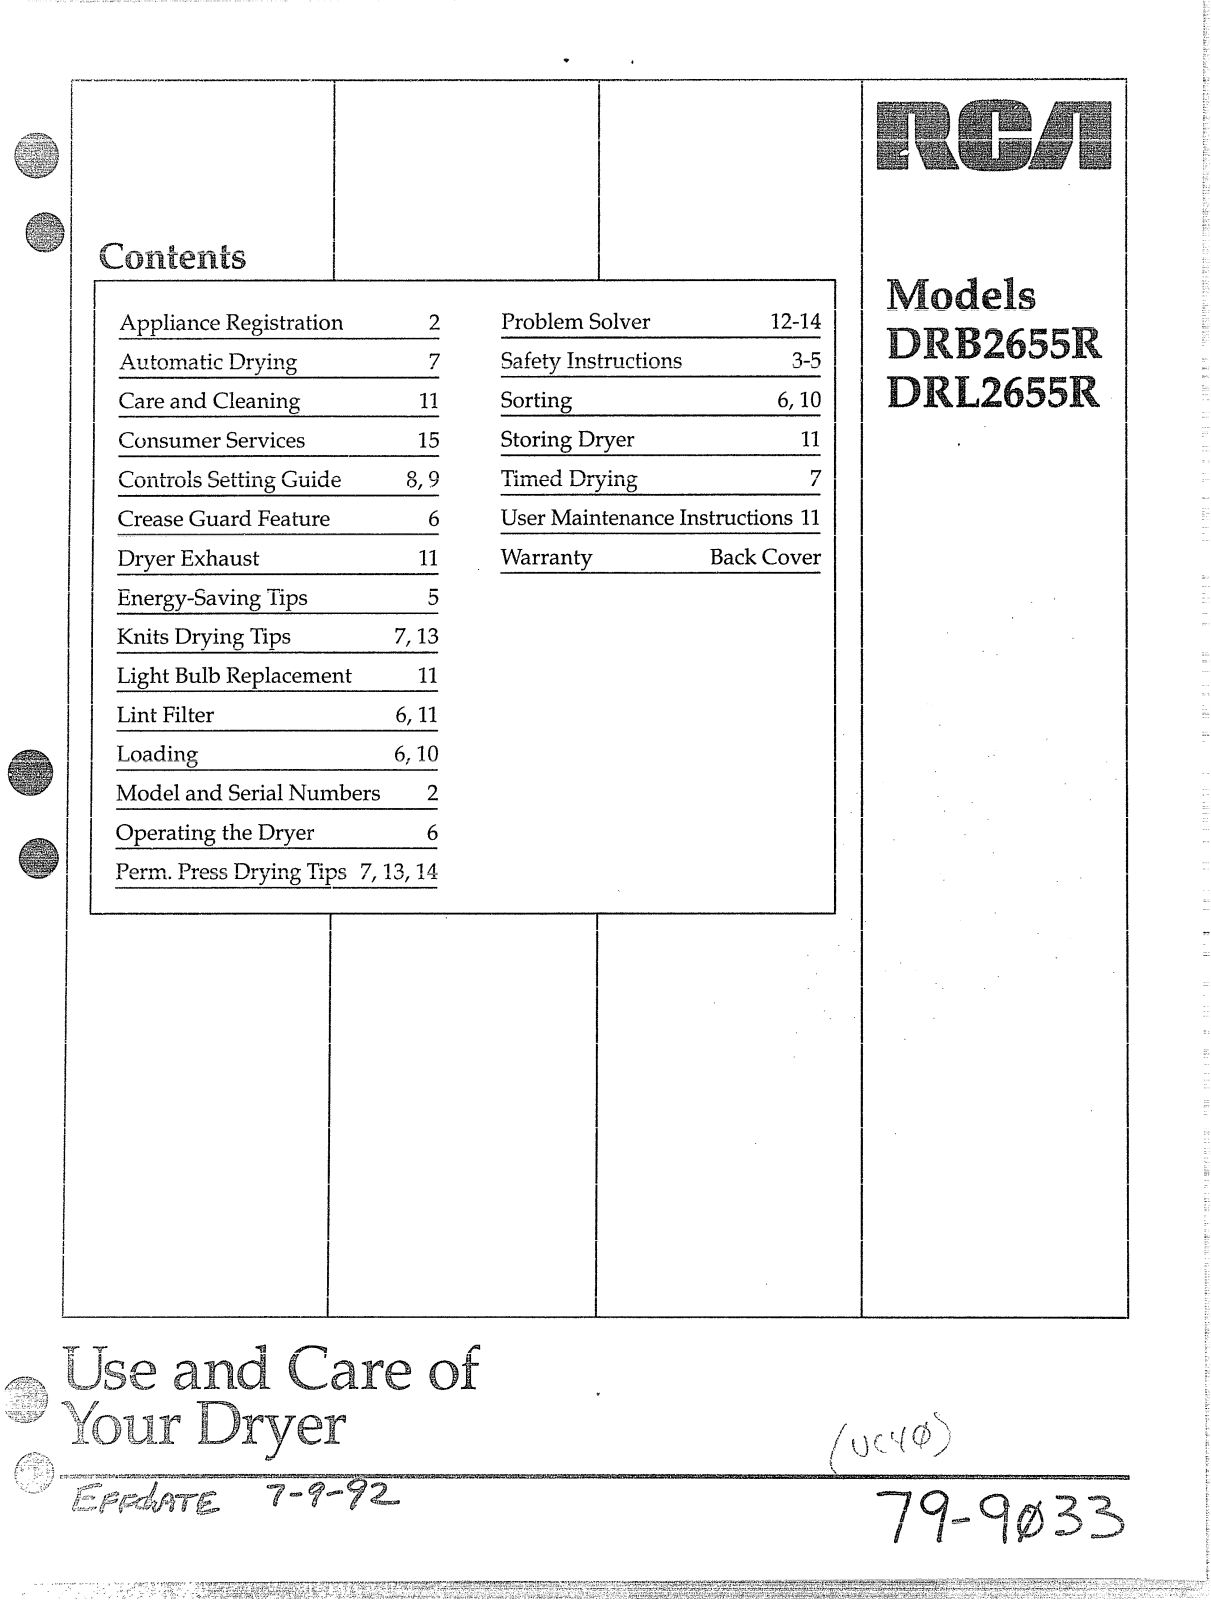 GE DRL2655R, DRB2655R Use and Care Manual